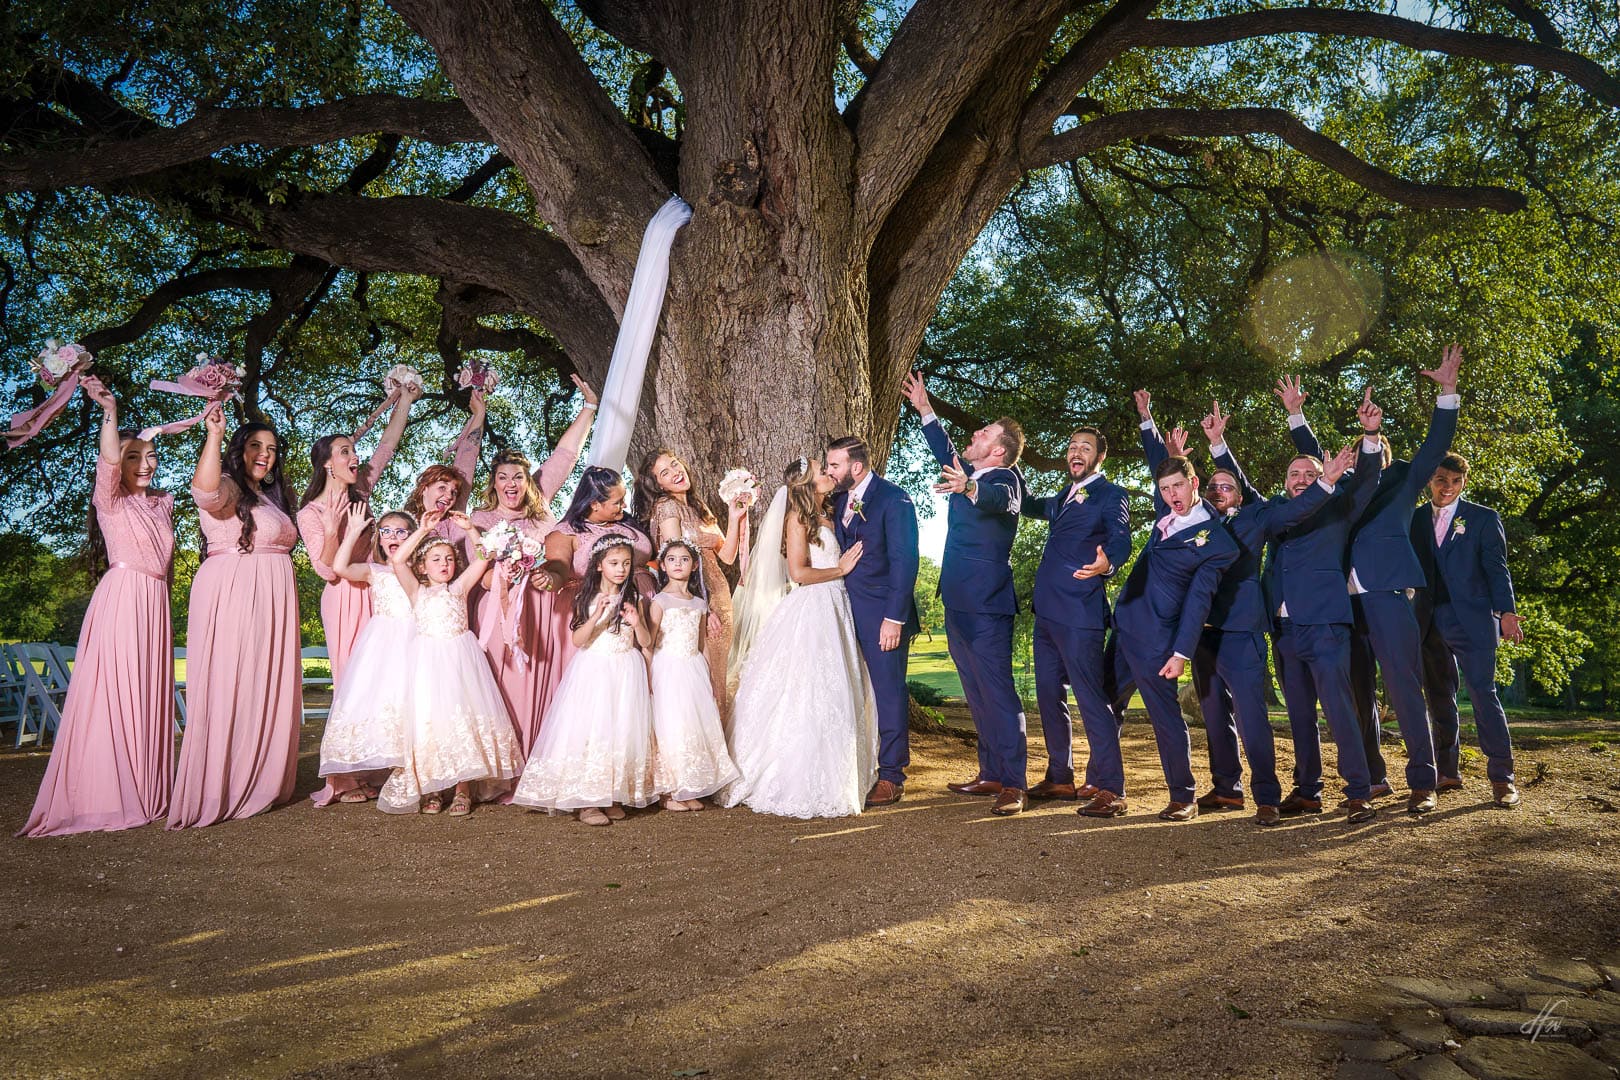 Newlyweds kiss surrounded by wedding party under a huge tree.